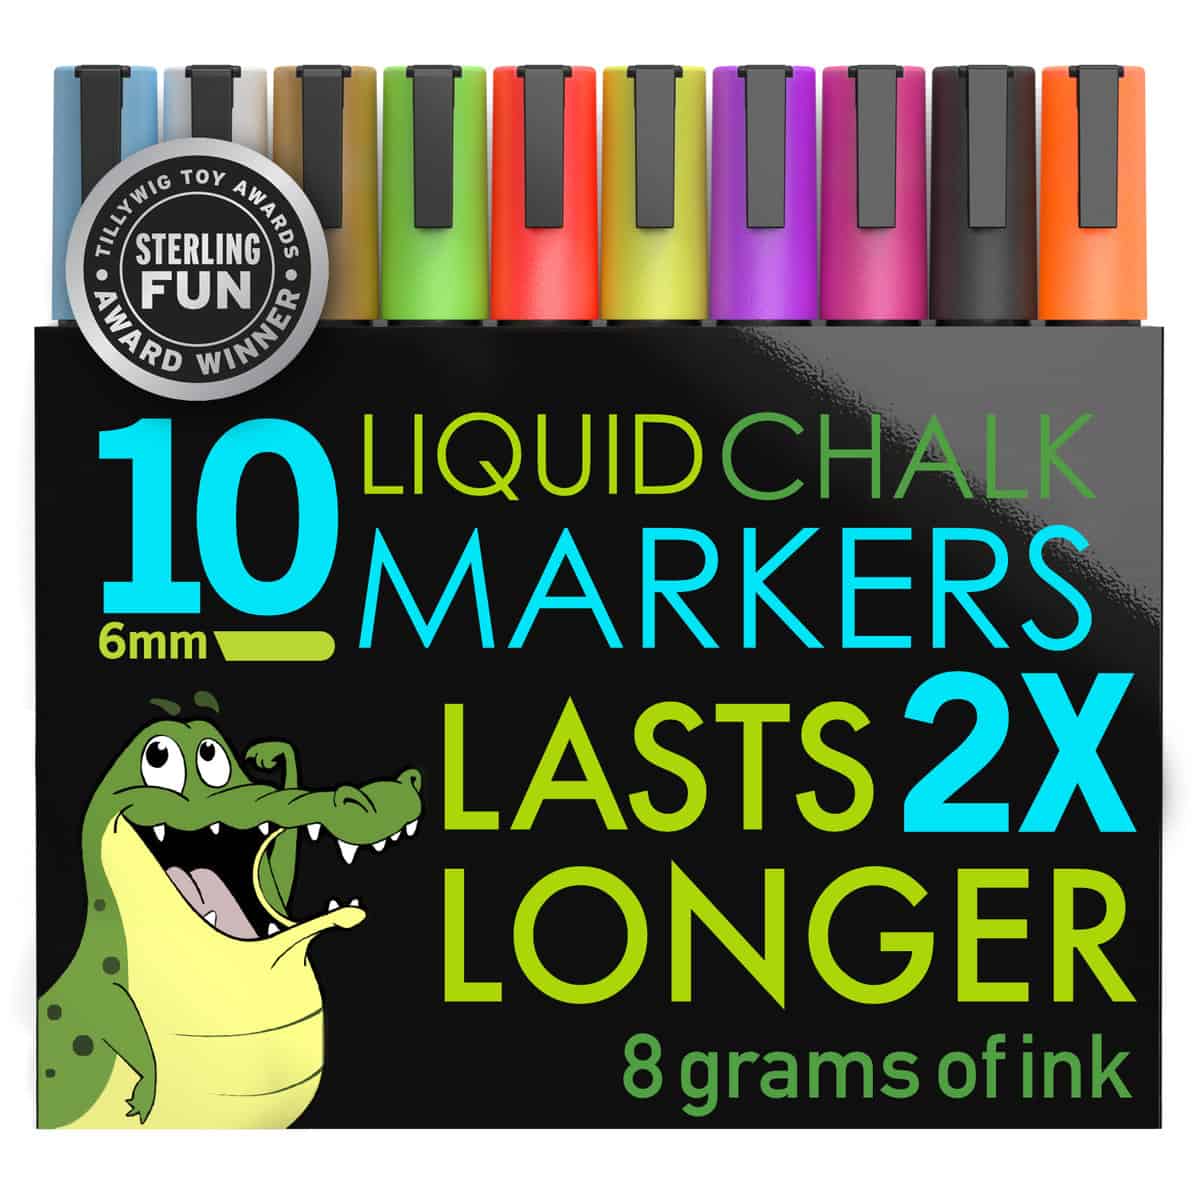 Crafty Croc Liquid Chalk Markers, 10 Pack of Neon Chalk Pens, for Nonporous